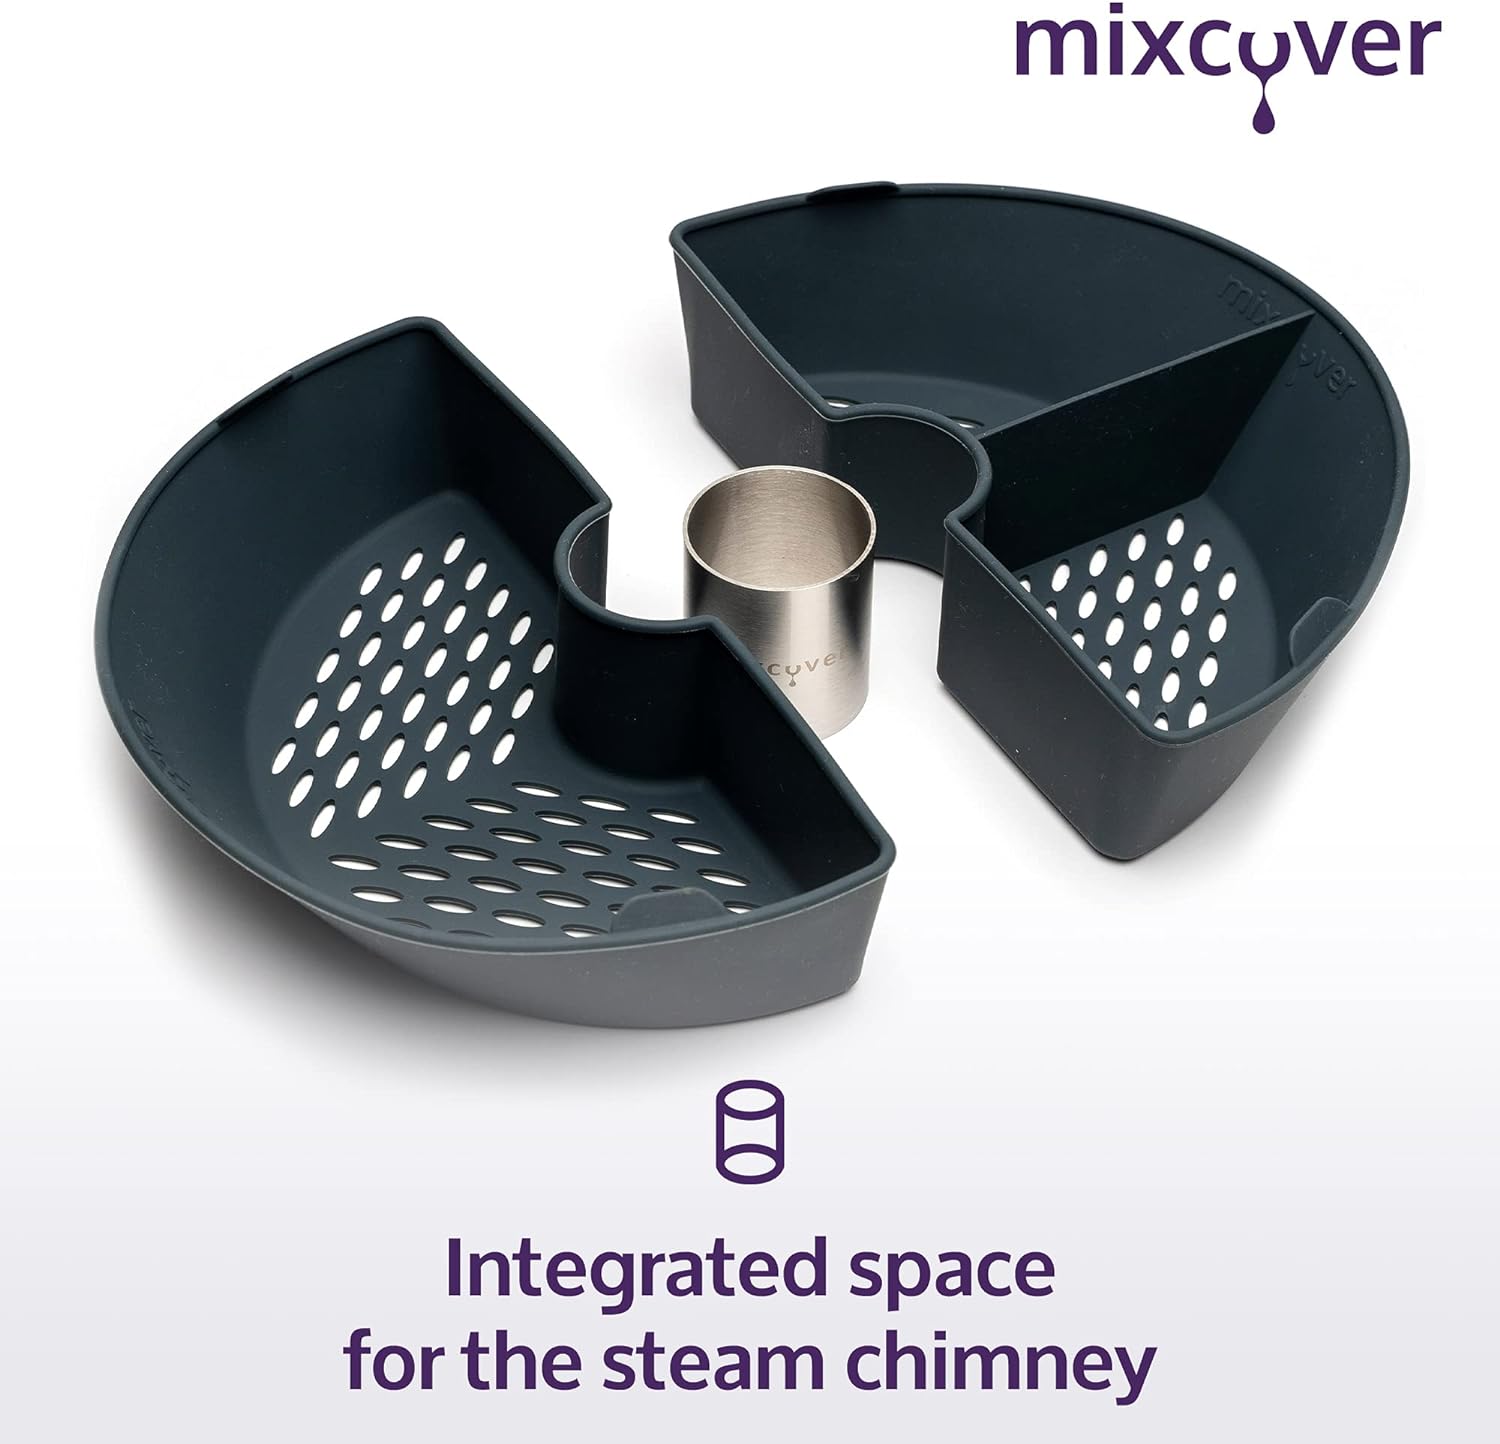 Mixcover cooking chamber divider (HALF) for Thermomix Varoma steam cooking chamber - to divide the cooking chamber, steam cooking divider compatible with TM5 TM6 TM31 half